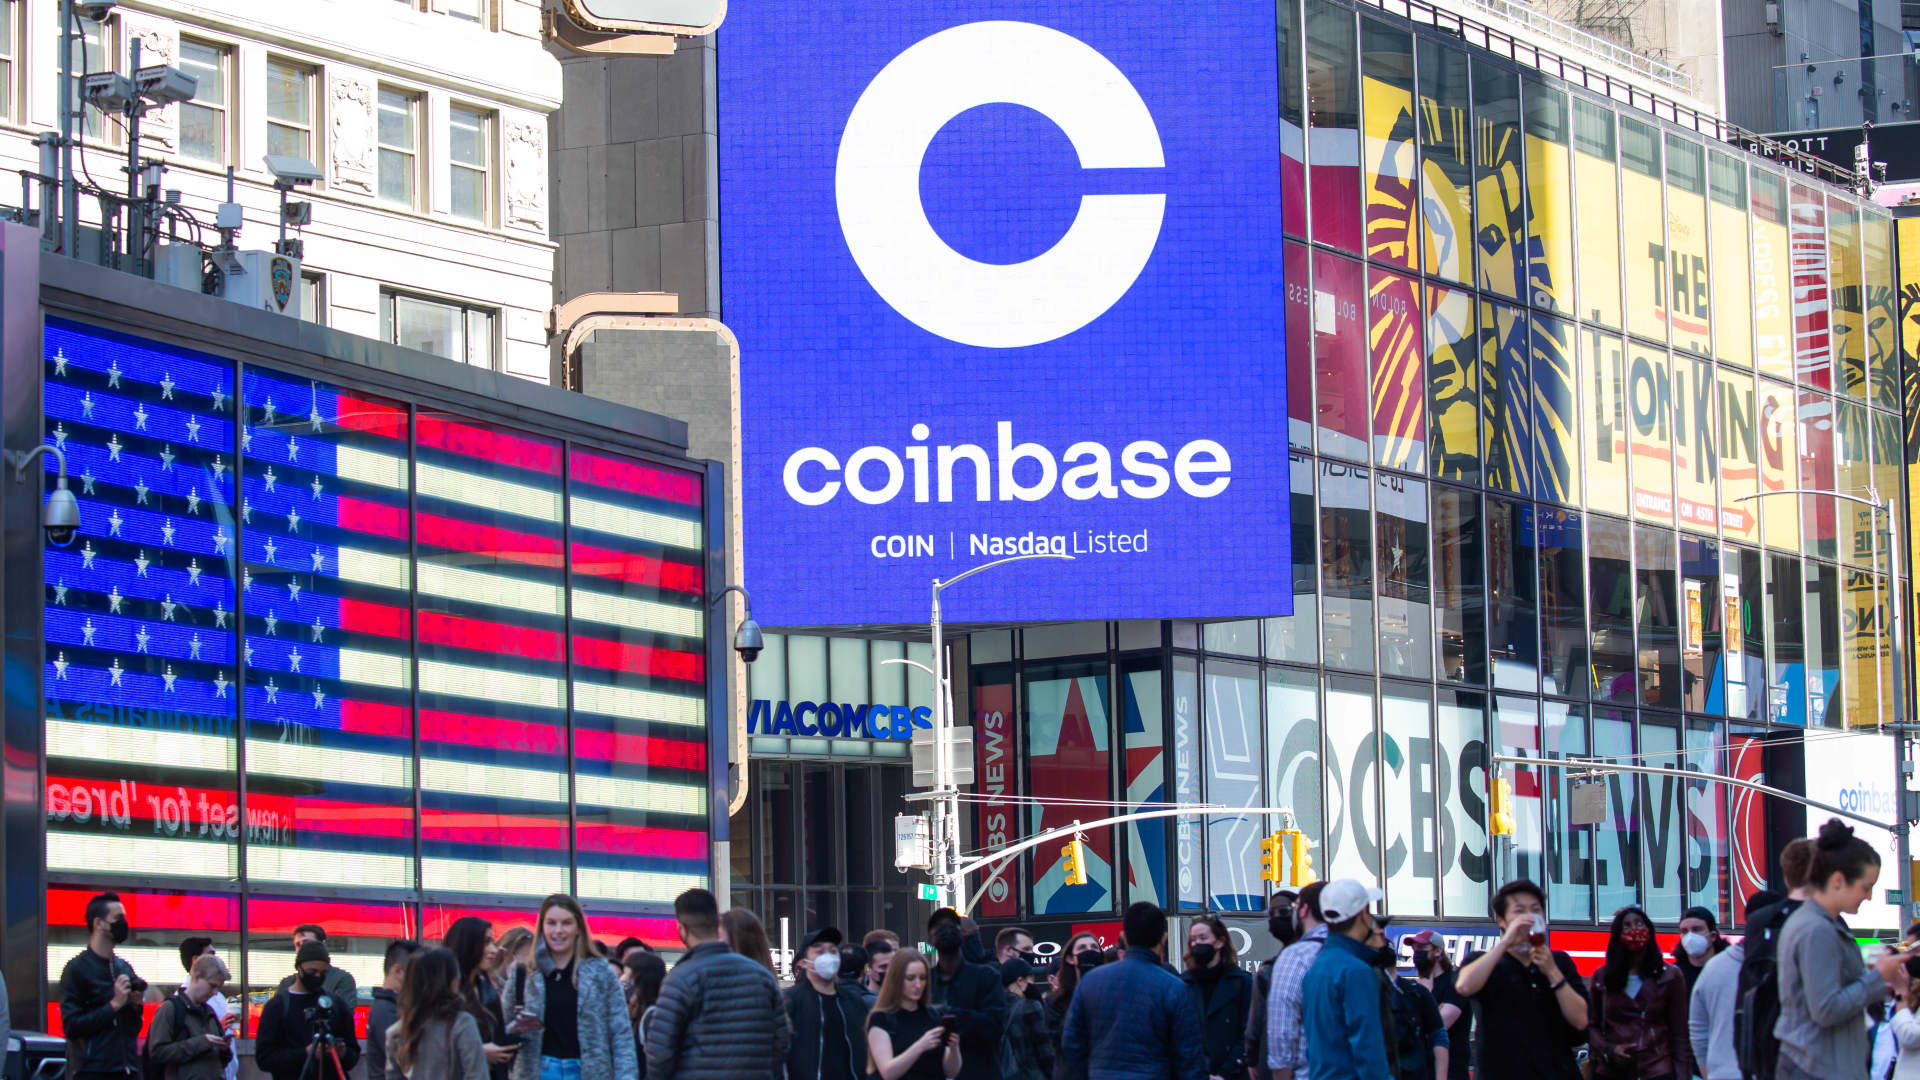 Coinbase will struggle to turn a profit in crypto downturn, JPMorgan says in downgrade